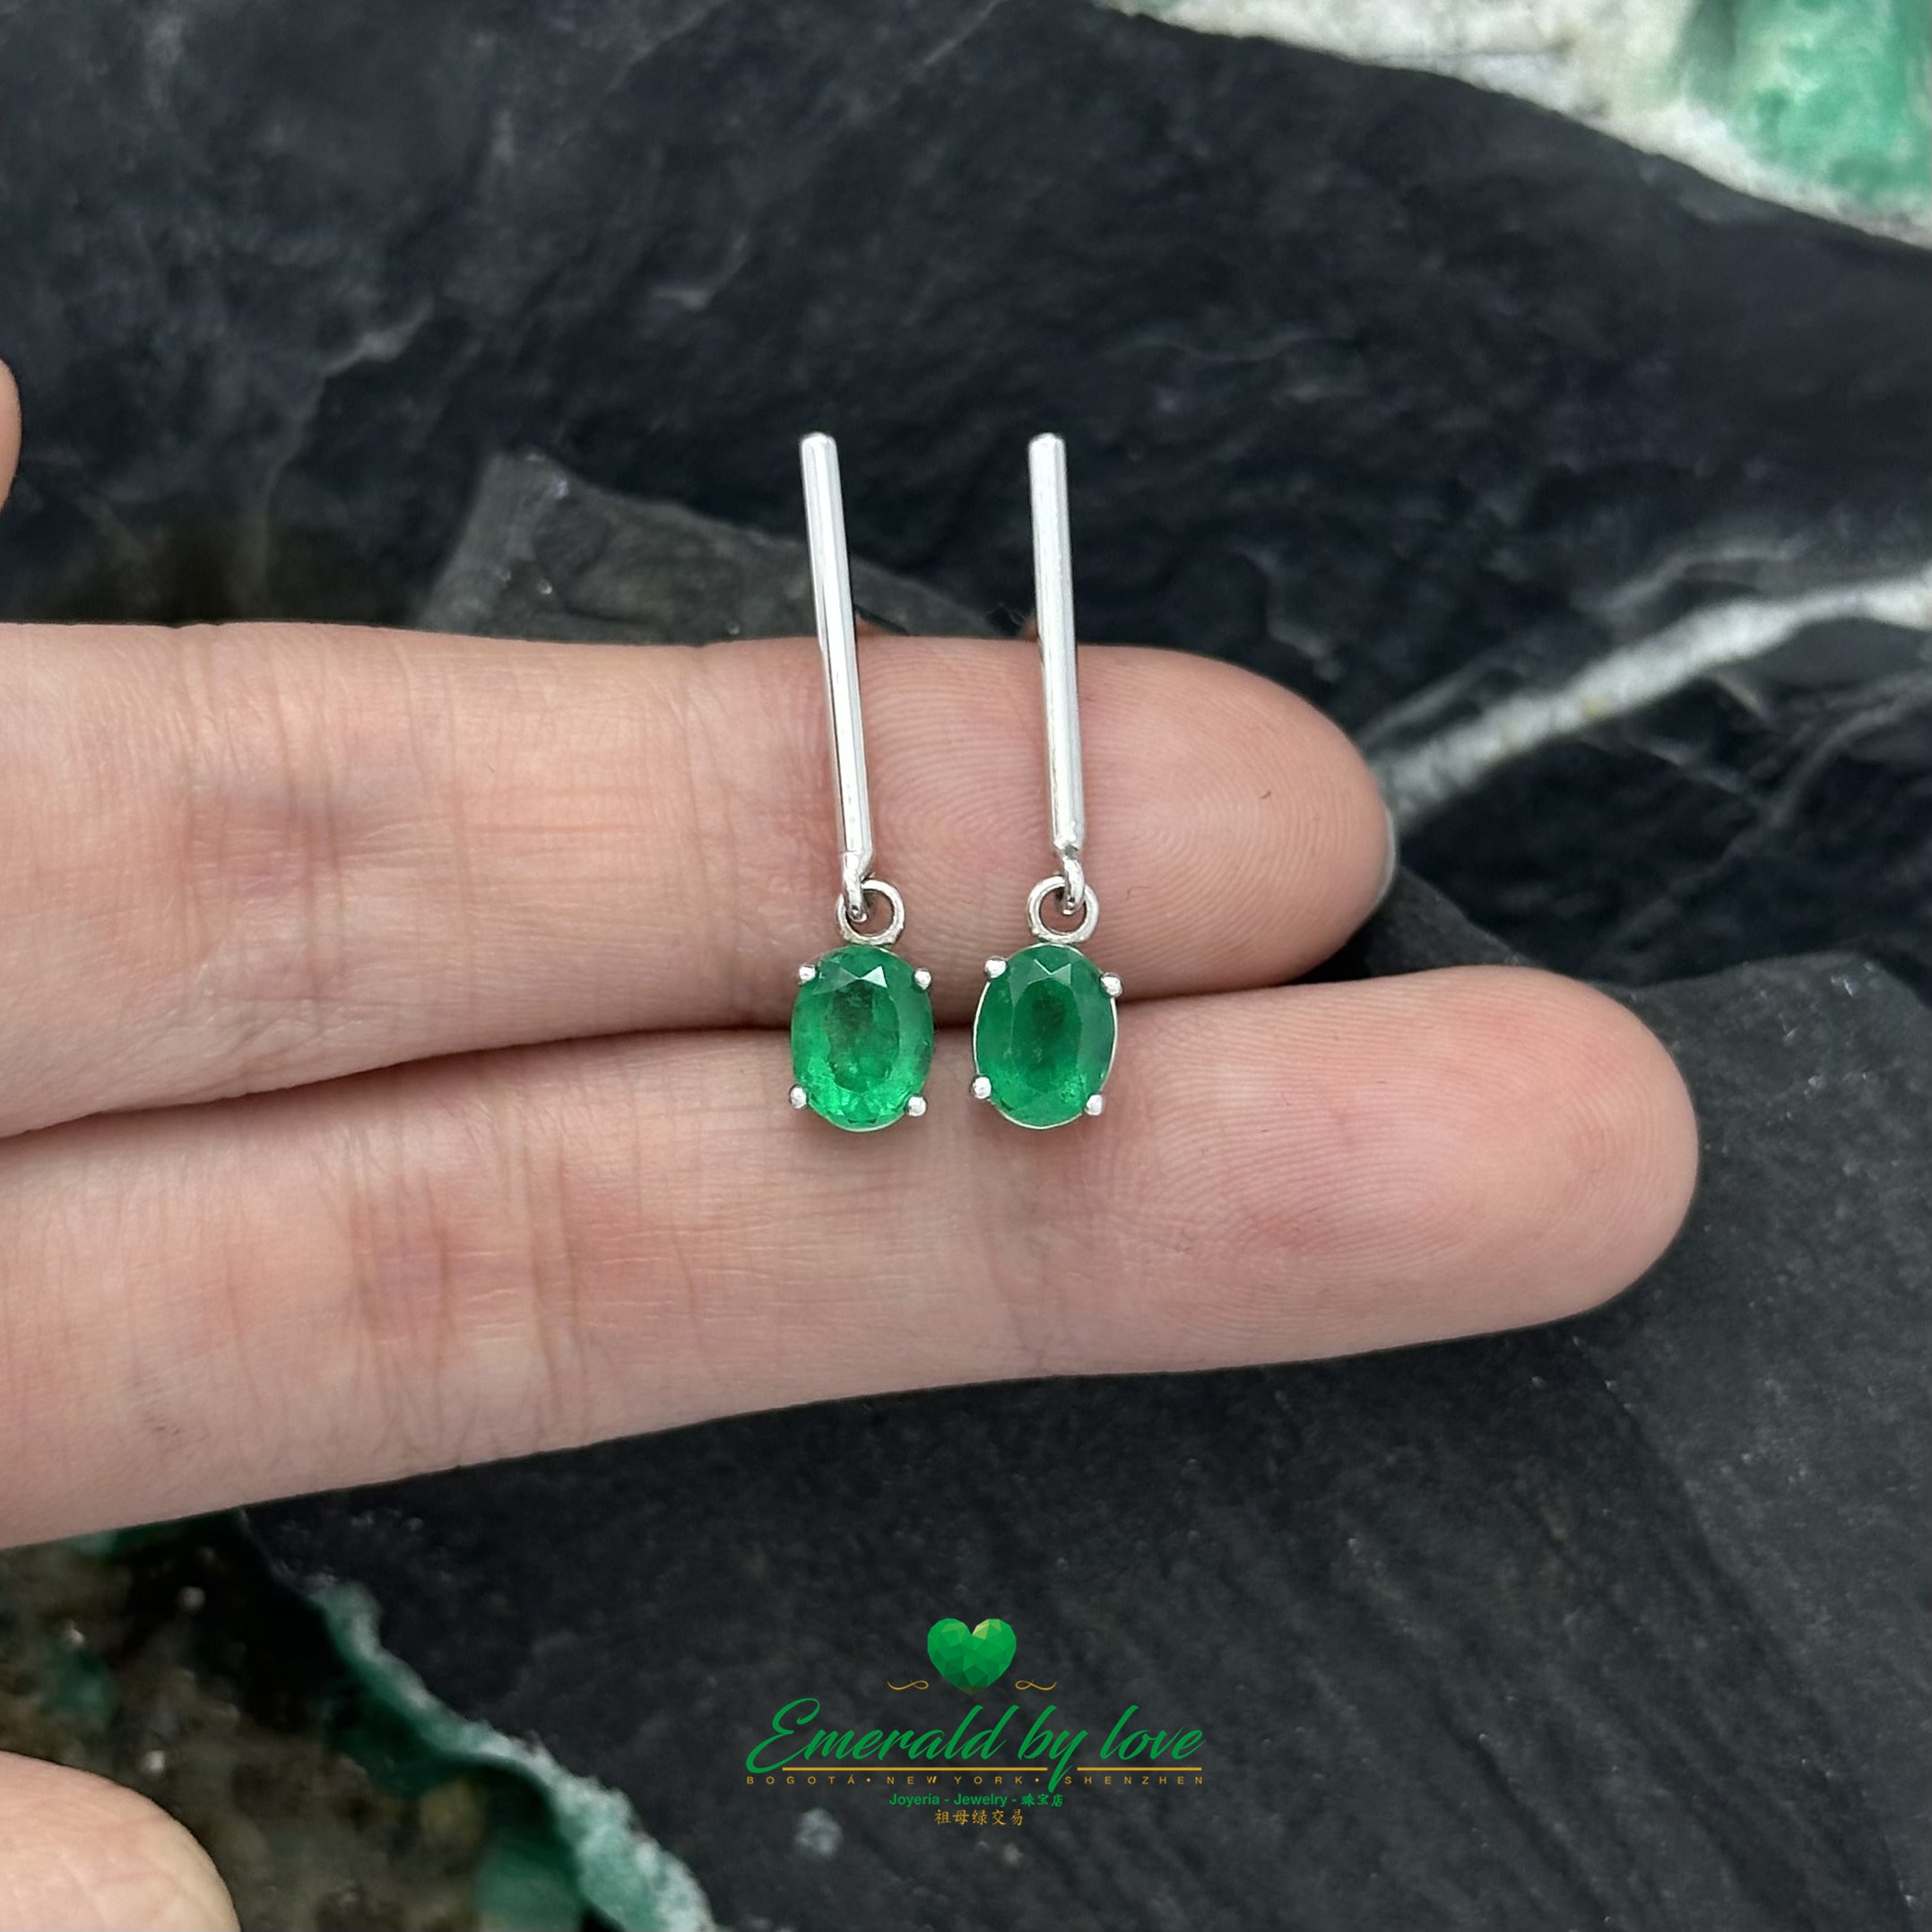 Timeless Glamour: Long White Gold Earrings with Oval Emeralds